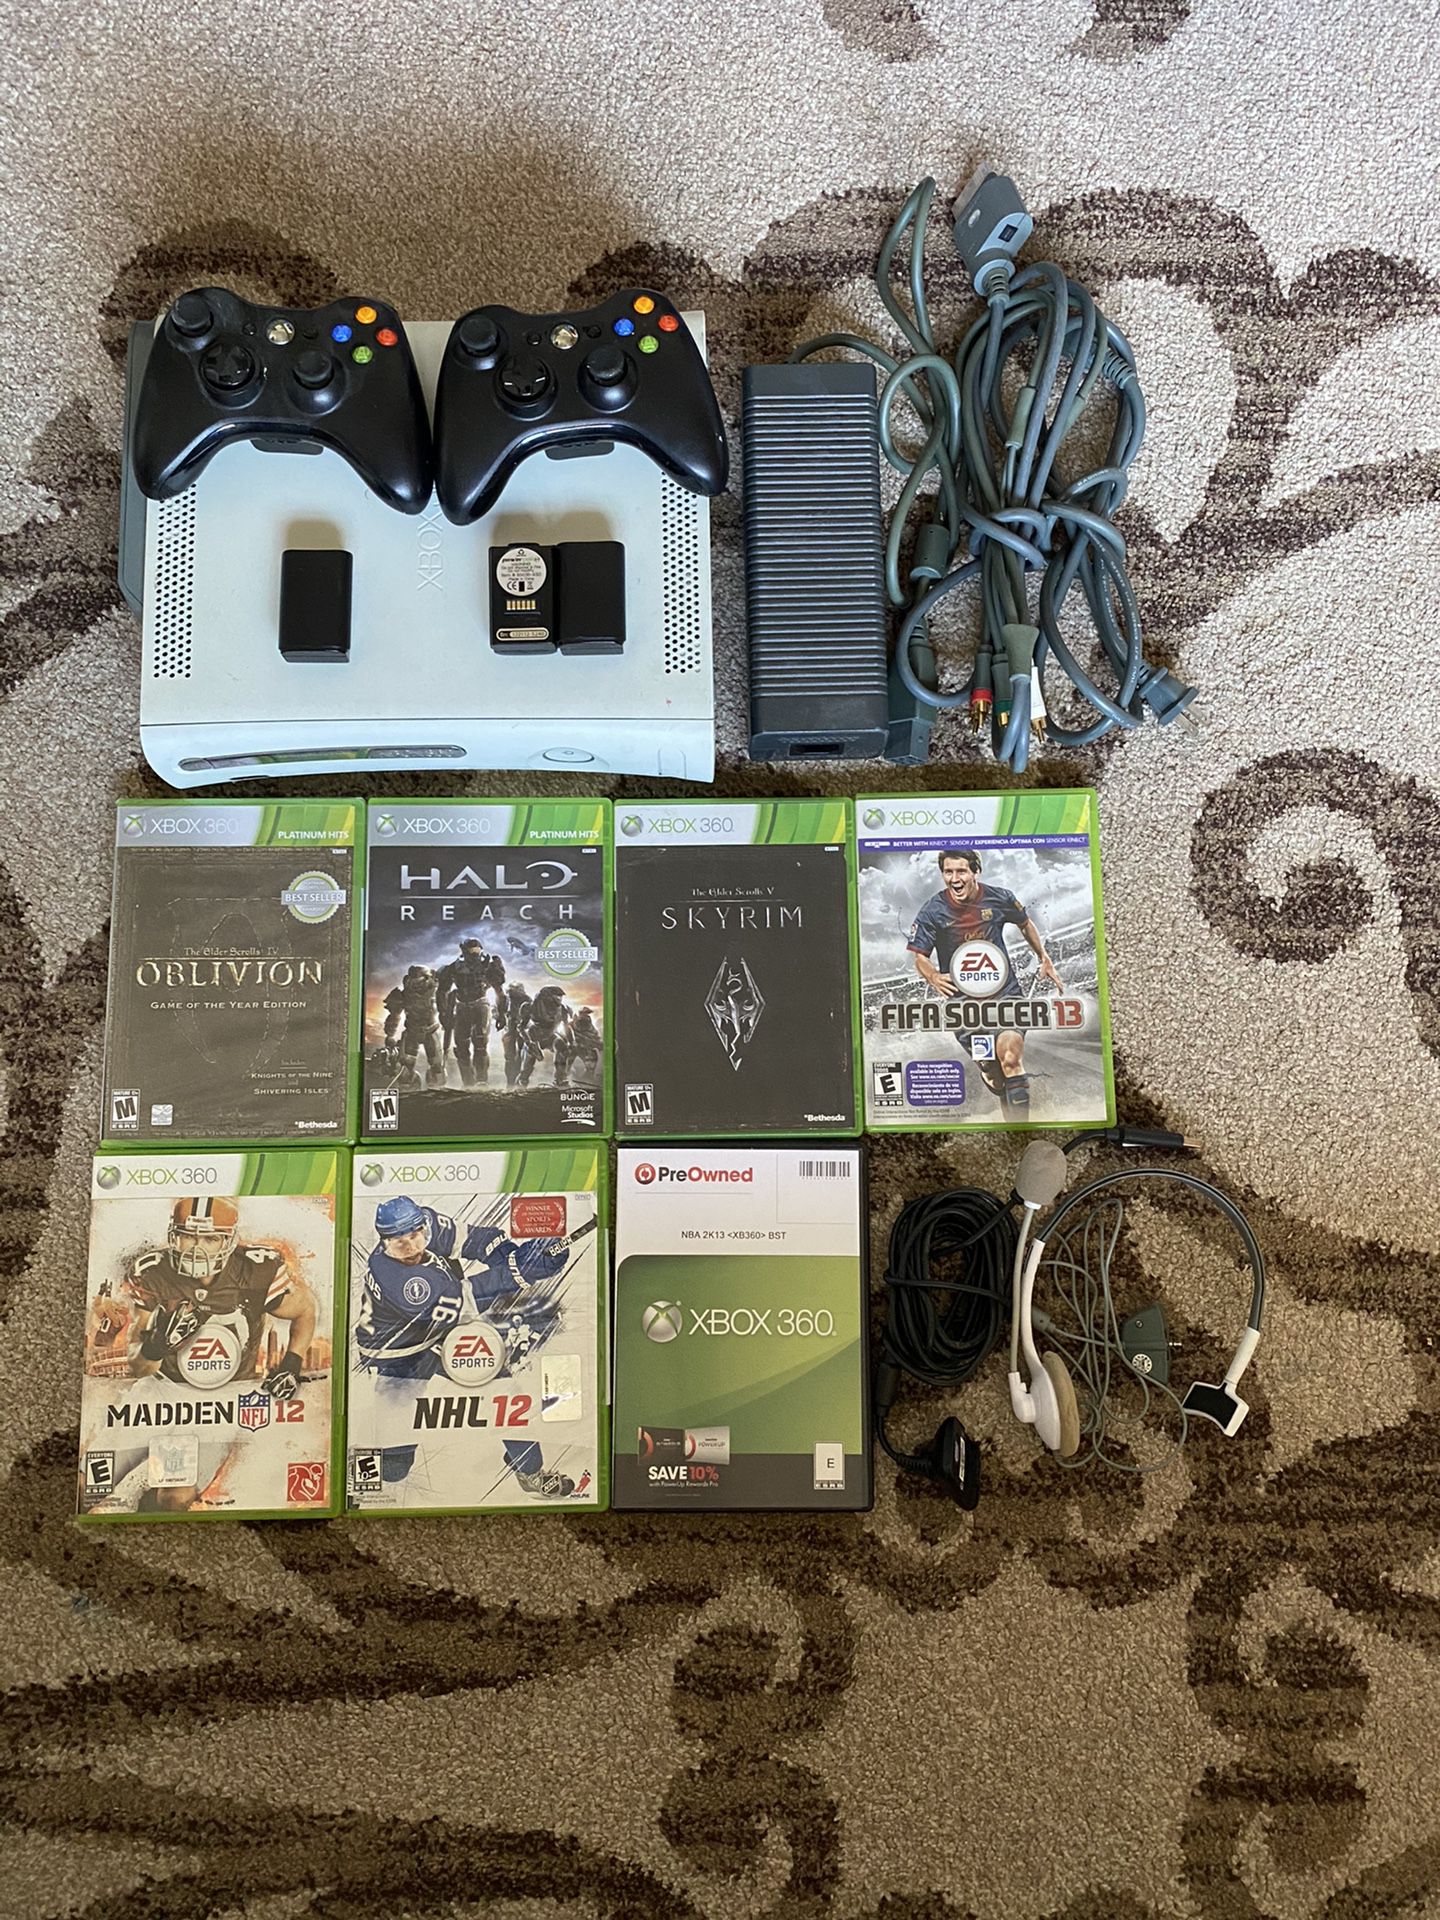 Xbox 360 with 2 controllers, games, and headset